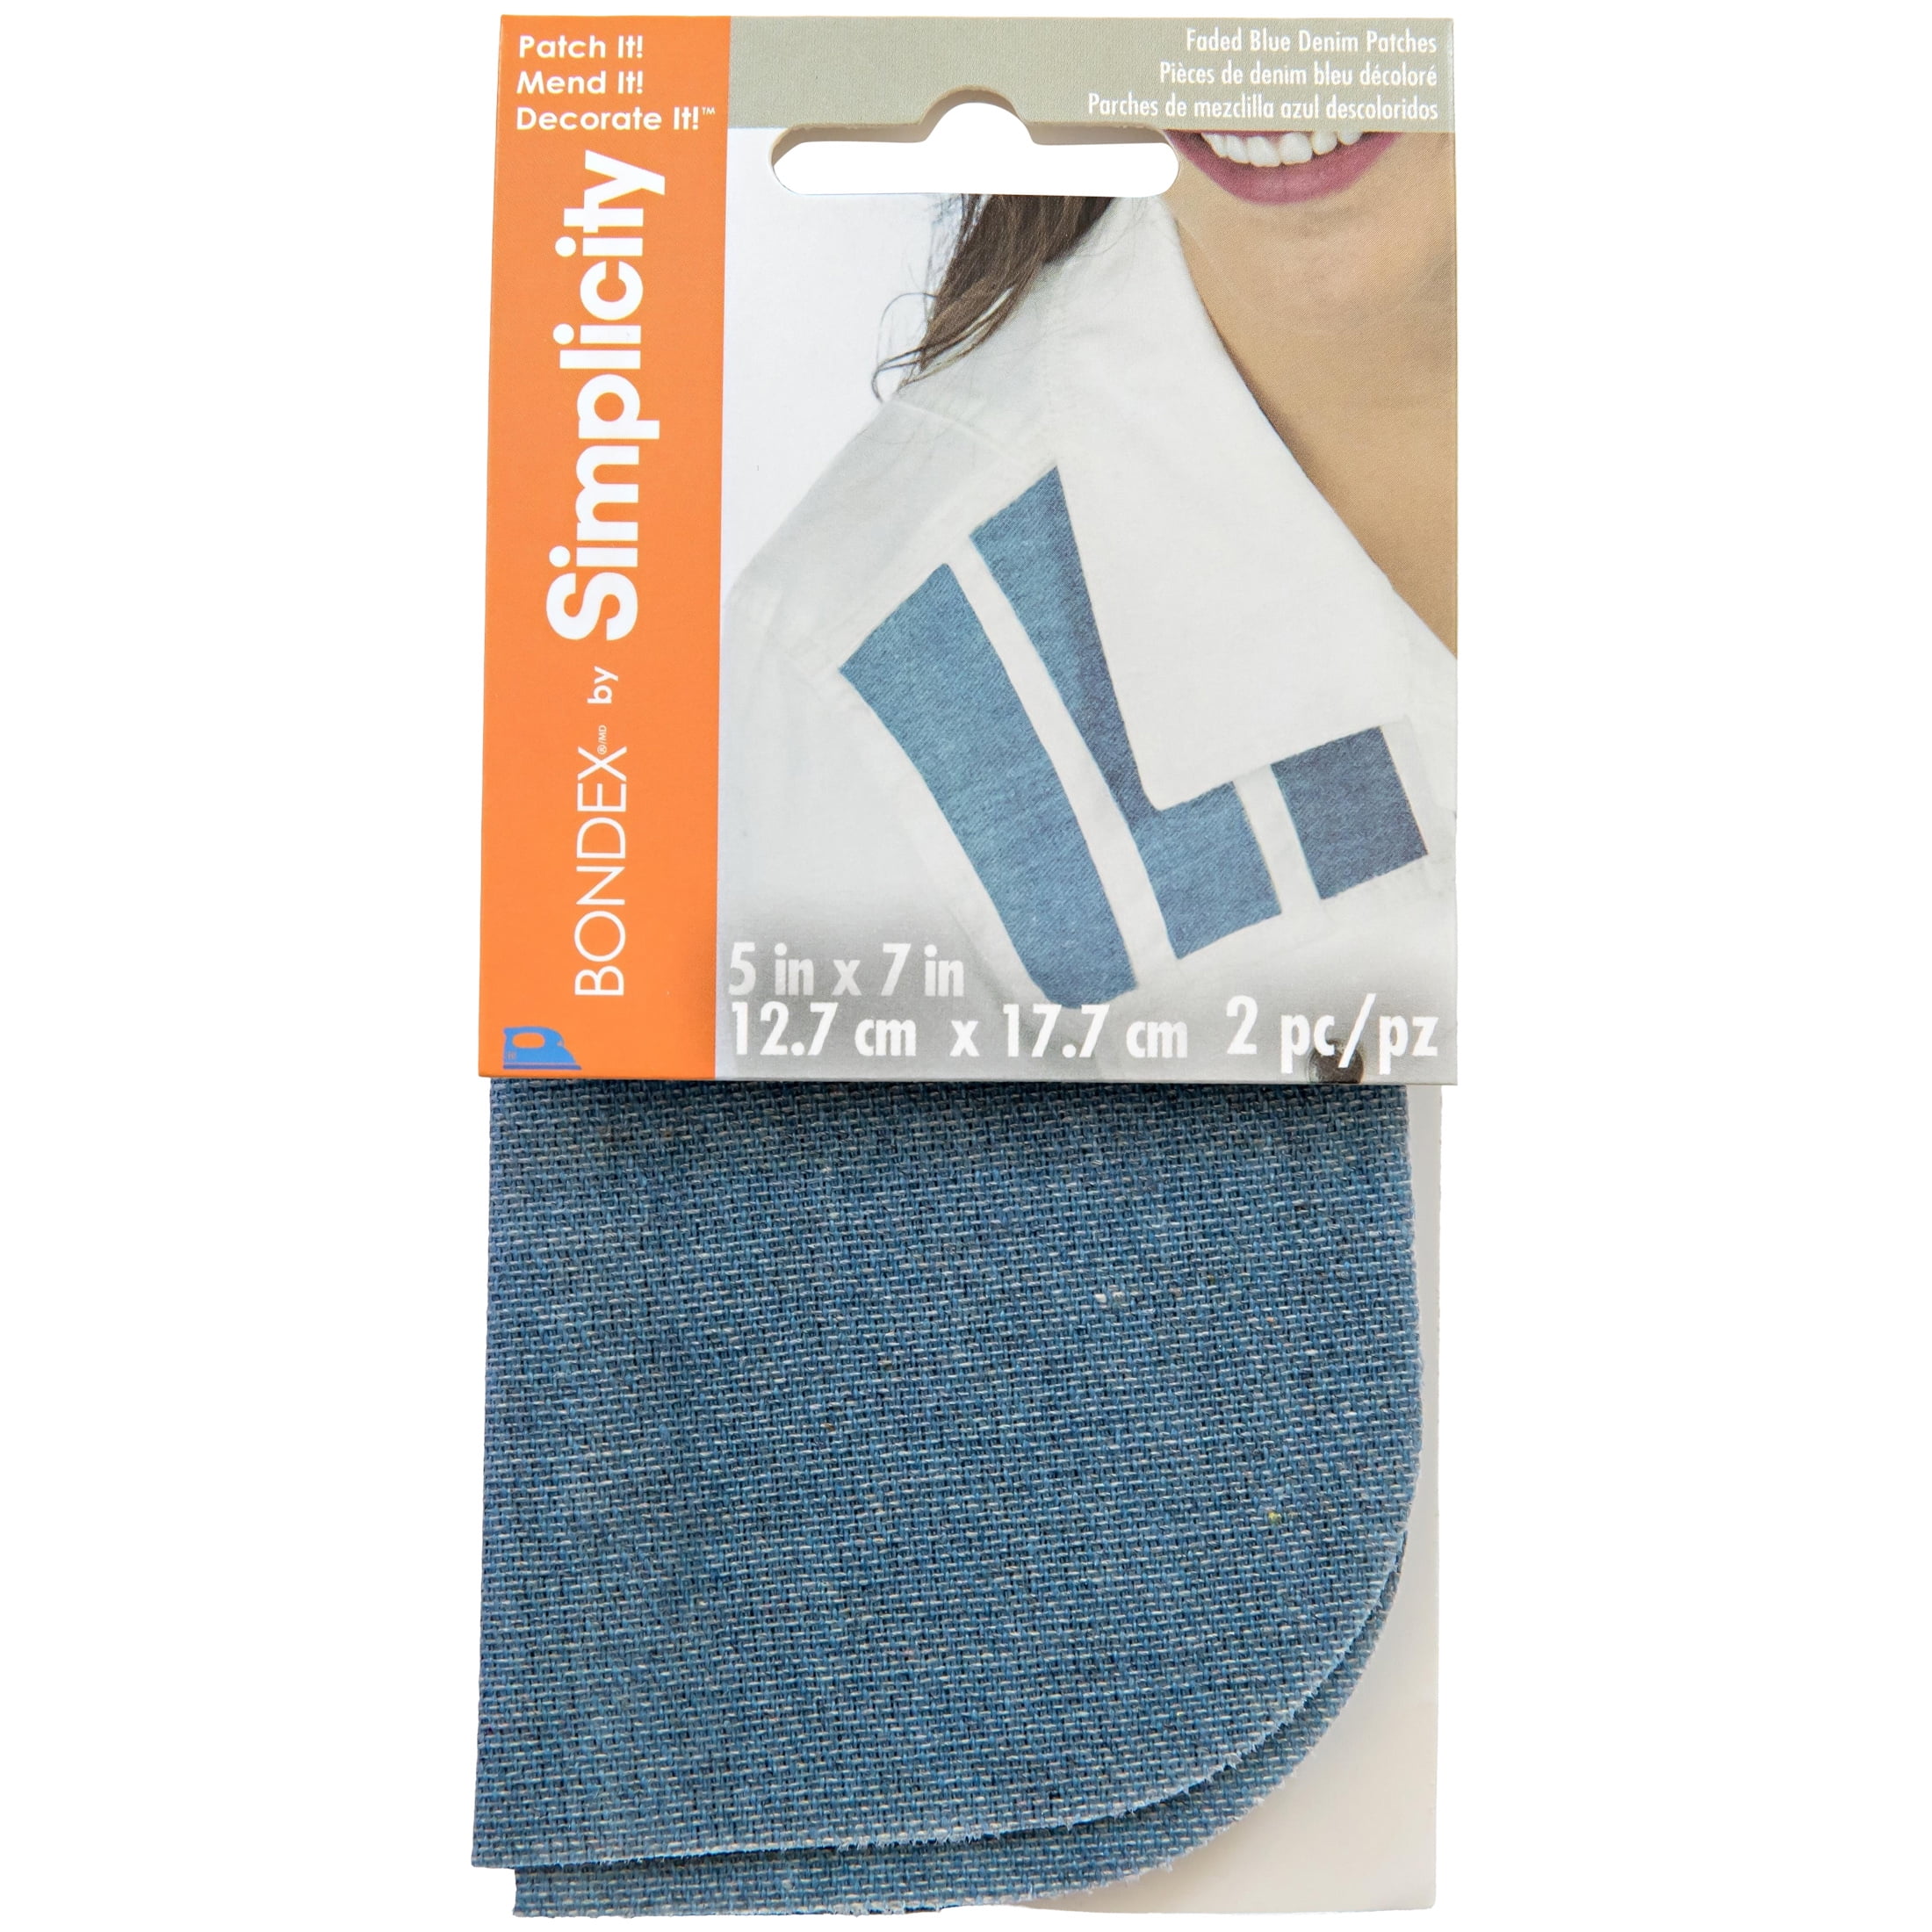 Bondex Faded Blue Denim 5x7 Fabric Iron-On Patches, 2 Pieces